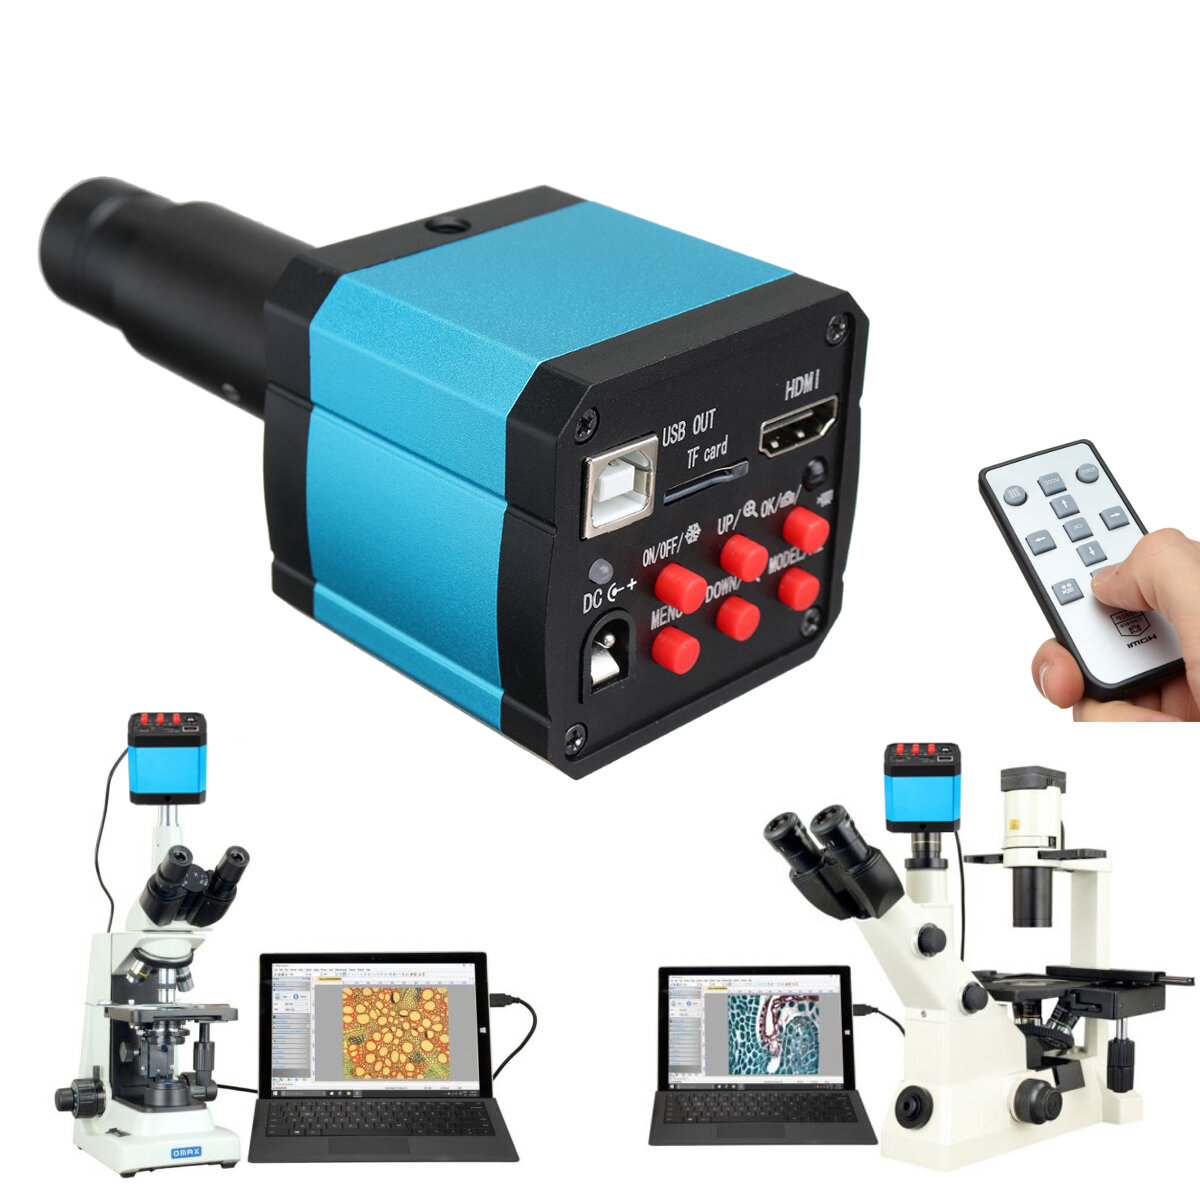 best price,hayear,16mp,1080p,60fps,usb,c,industry,microscope,camera,coupon,price,discount